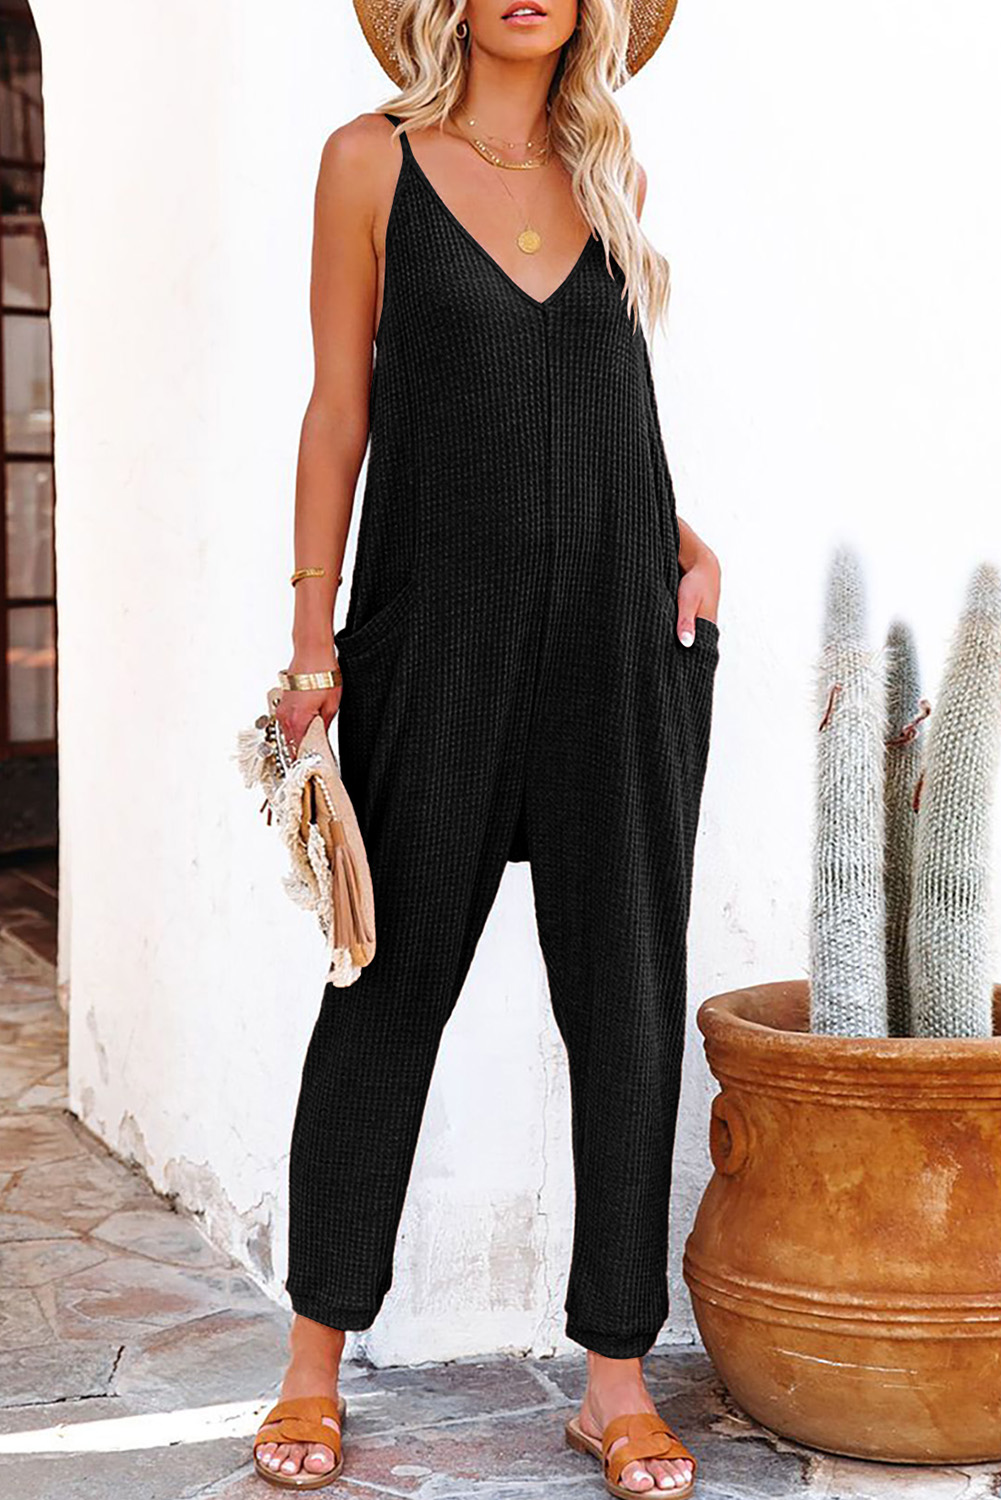 Shewin Wholesale CLOTHING Suppliers Black Textured Sleeveless V-Neck Pocketed Casual Jumpsuit